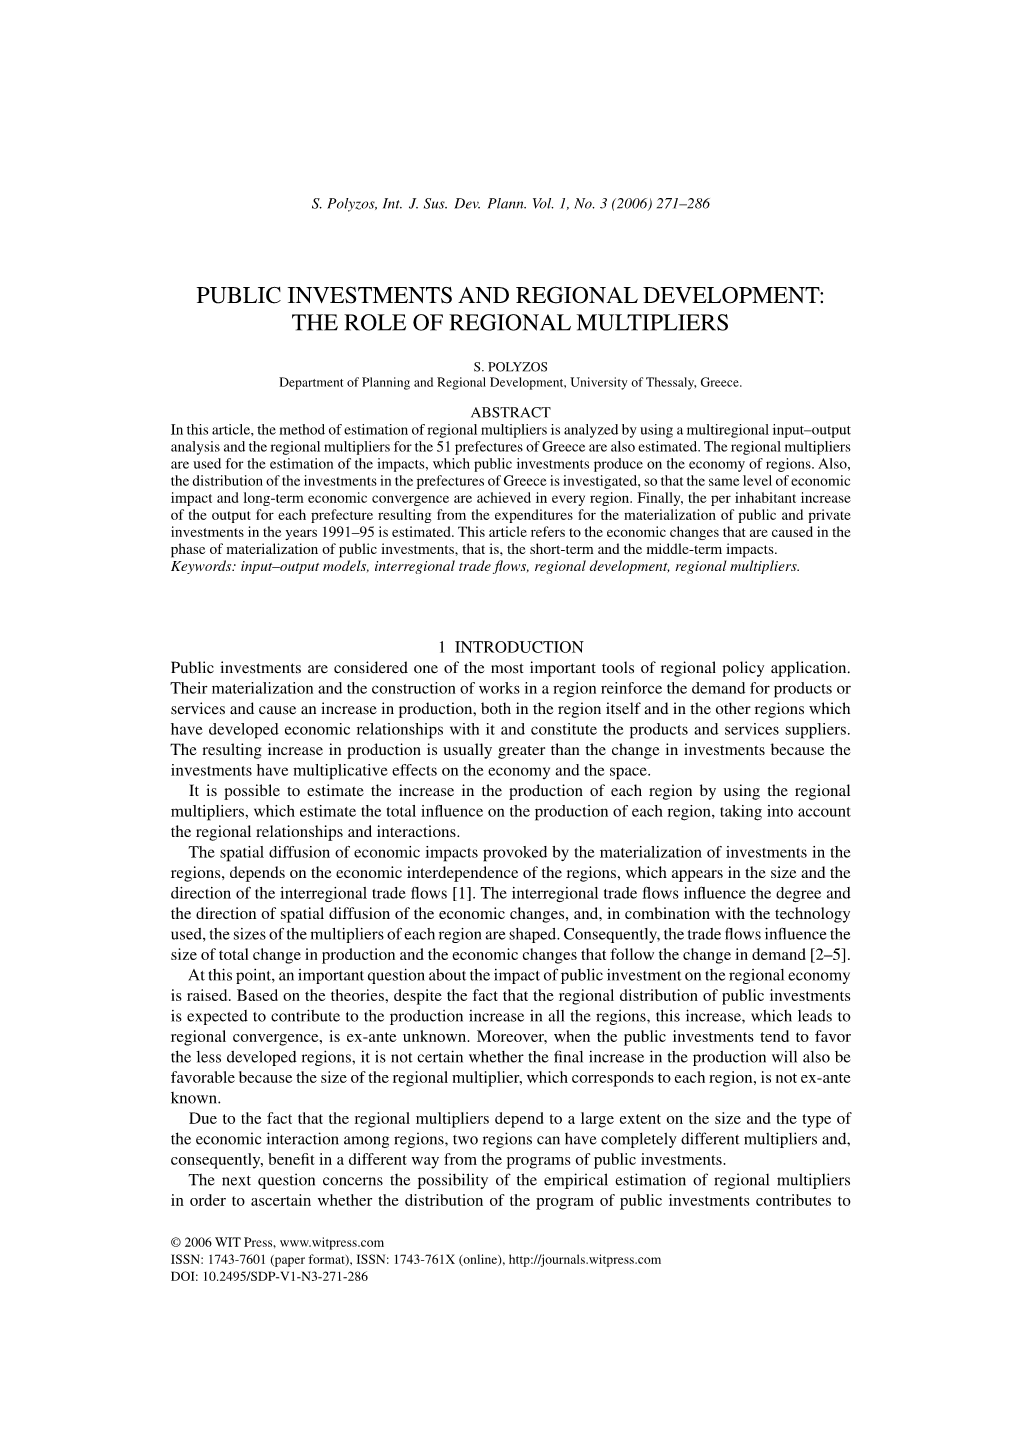 Public Investments and Regional Development: the Role of Regional Multipliers